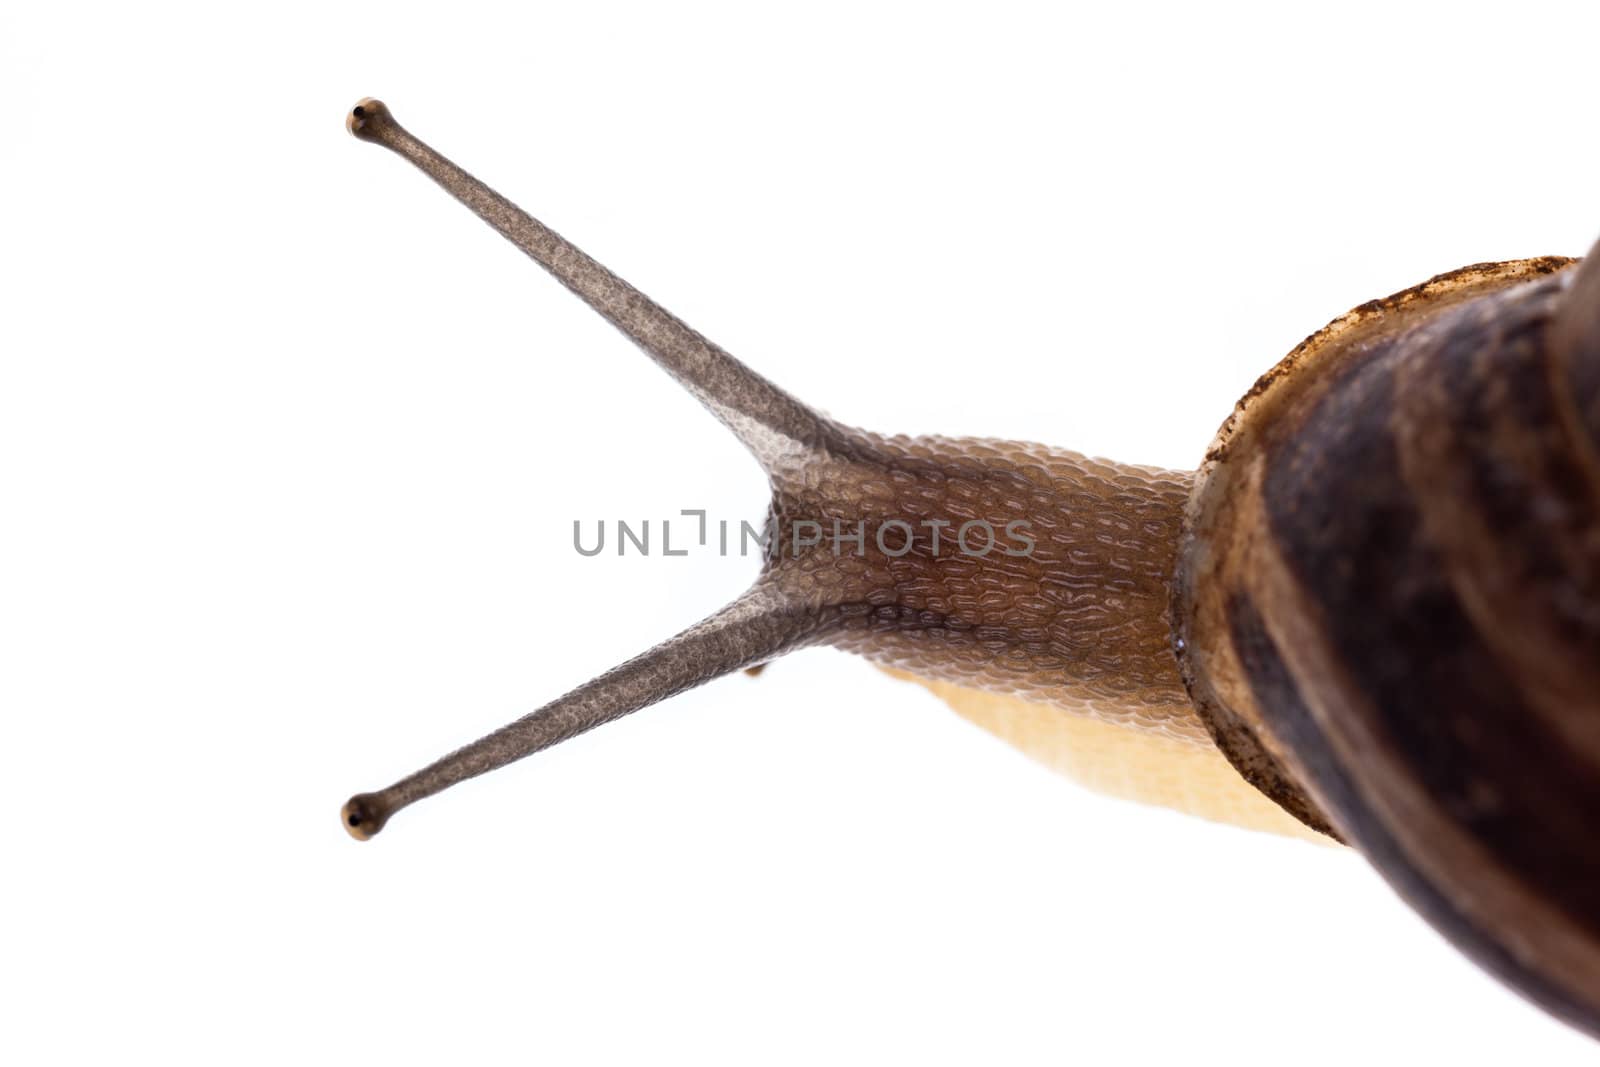 Extreme macro of a common land snail